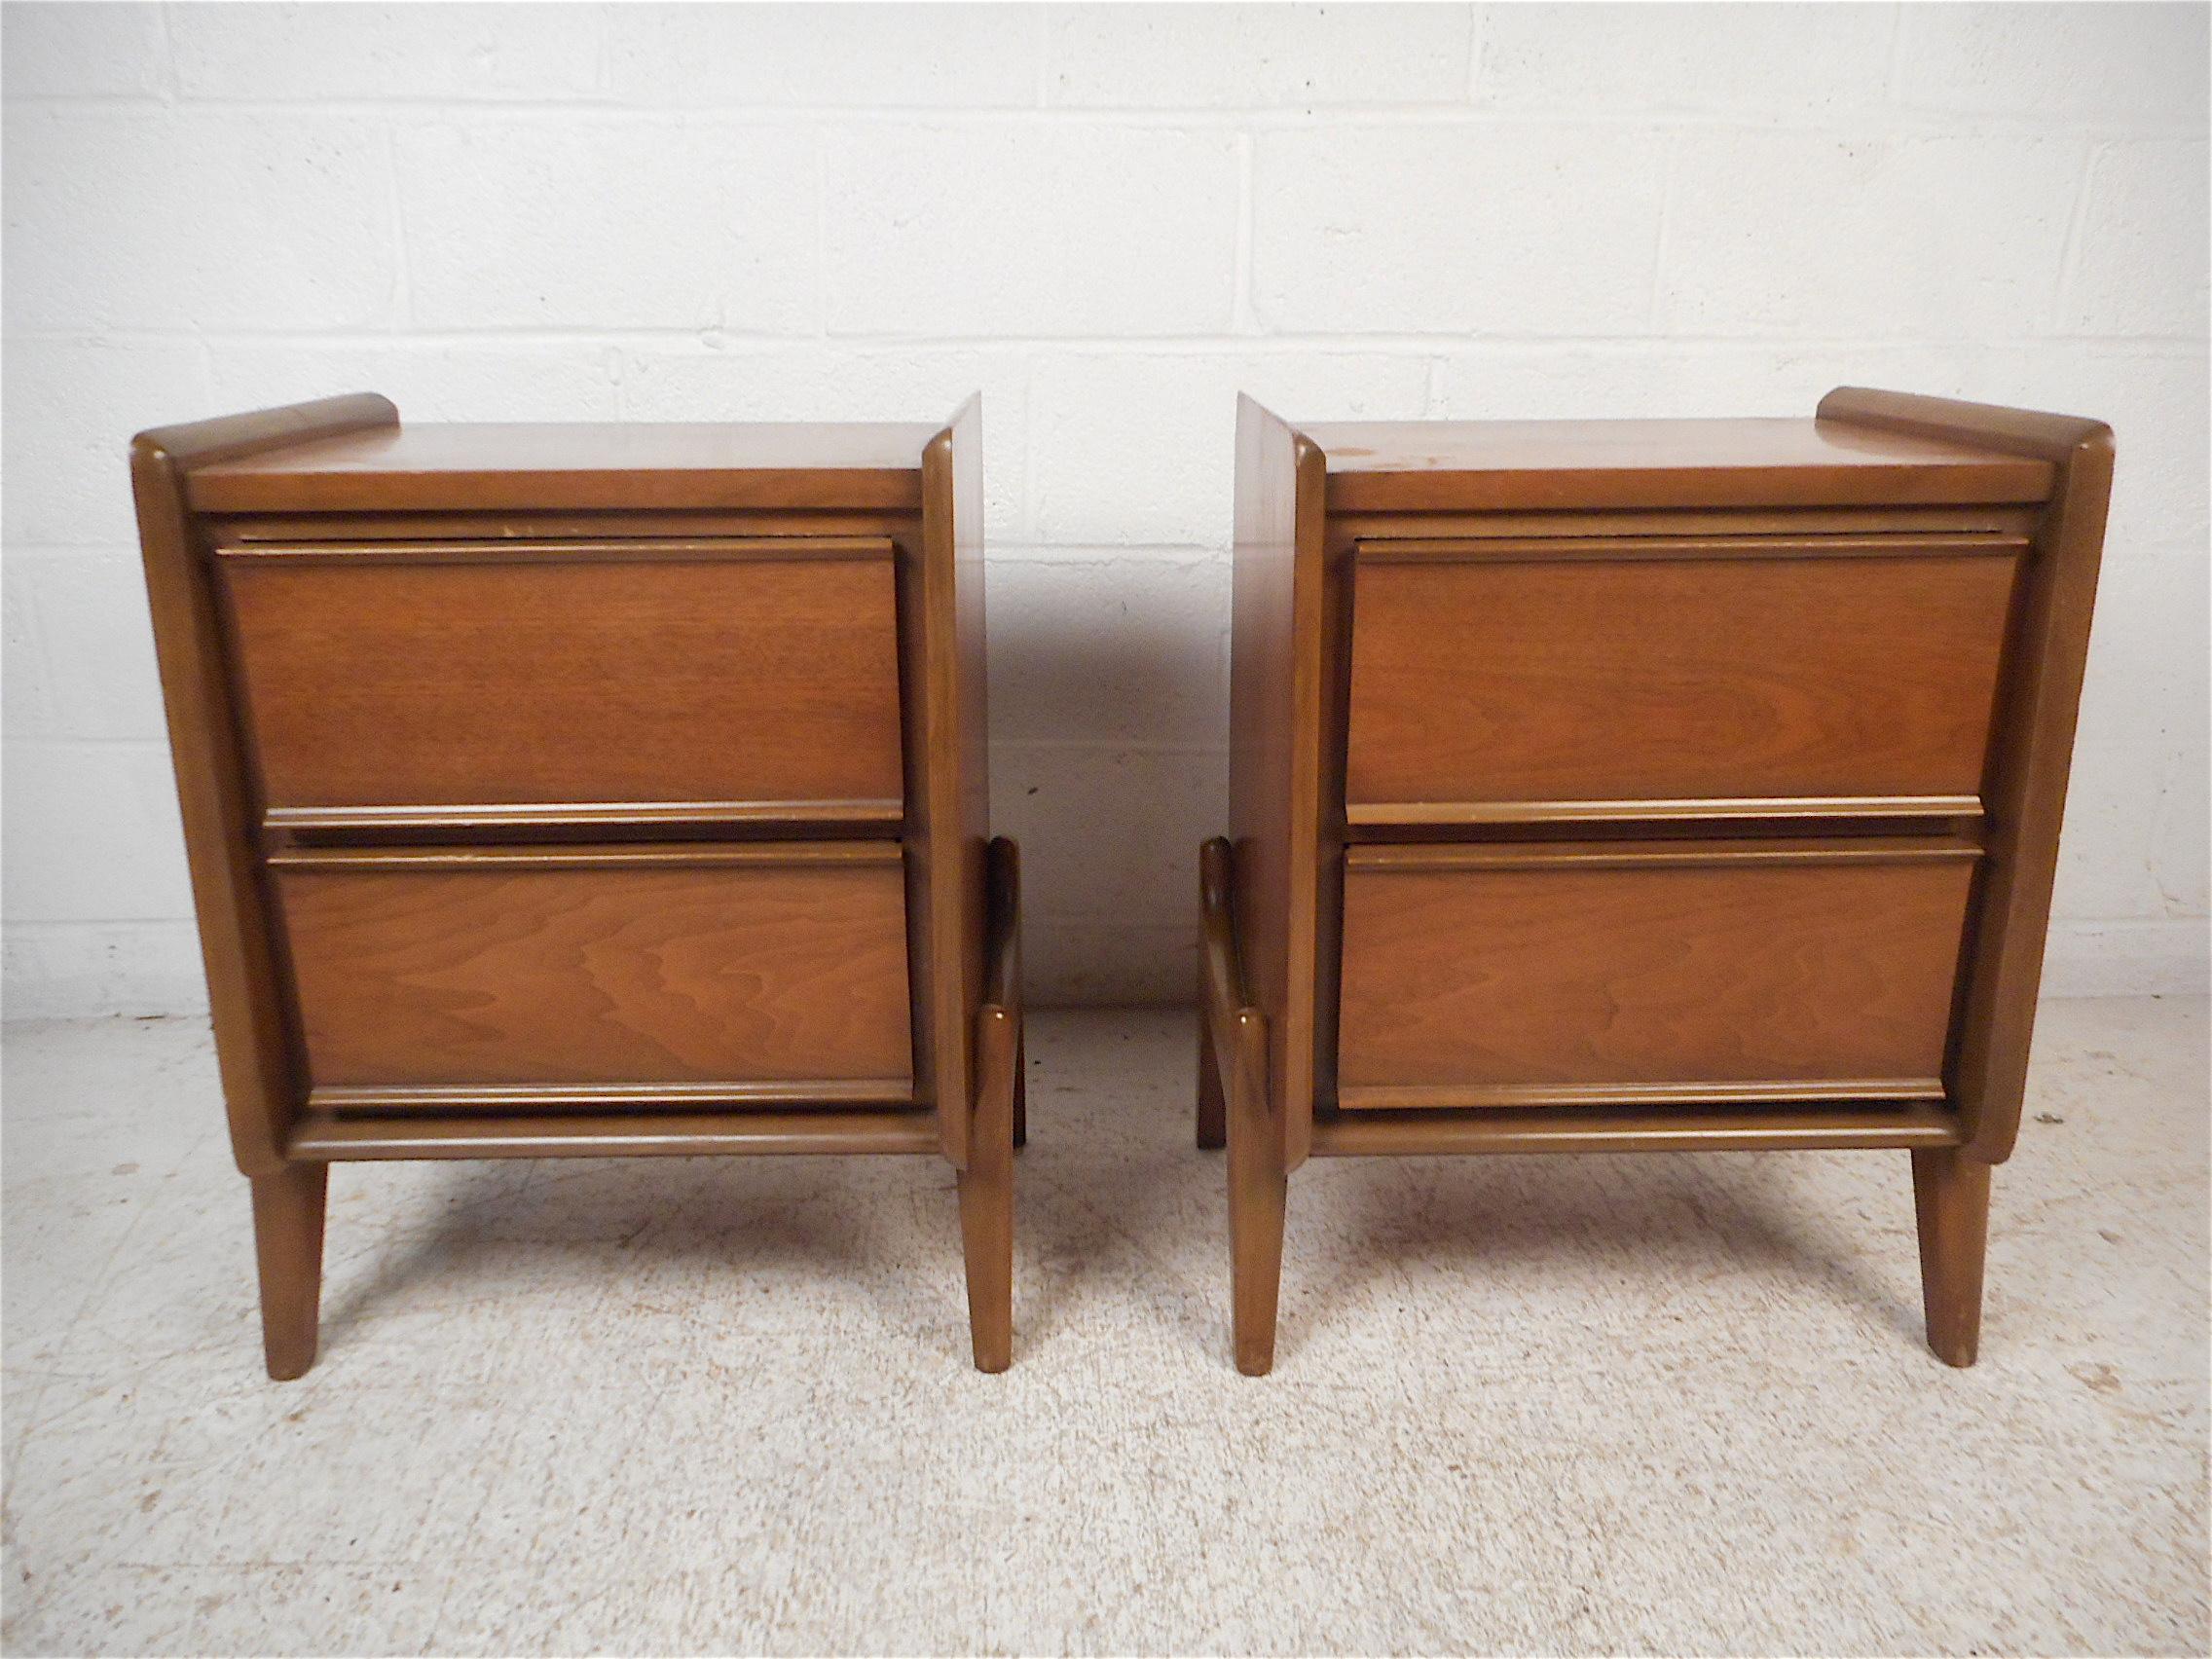 Stylish pair of midcentury nightstands by Grand Rapids Furniture Company. Sleek design with raised edges on the tabletops and sculpted legs. Two spacious drawers on either piece offer ample storage space. This pair is sure to prove a great addition